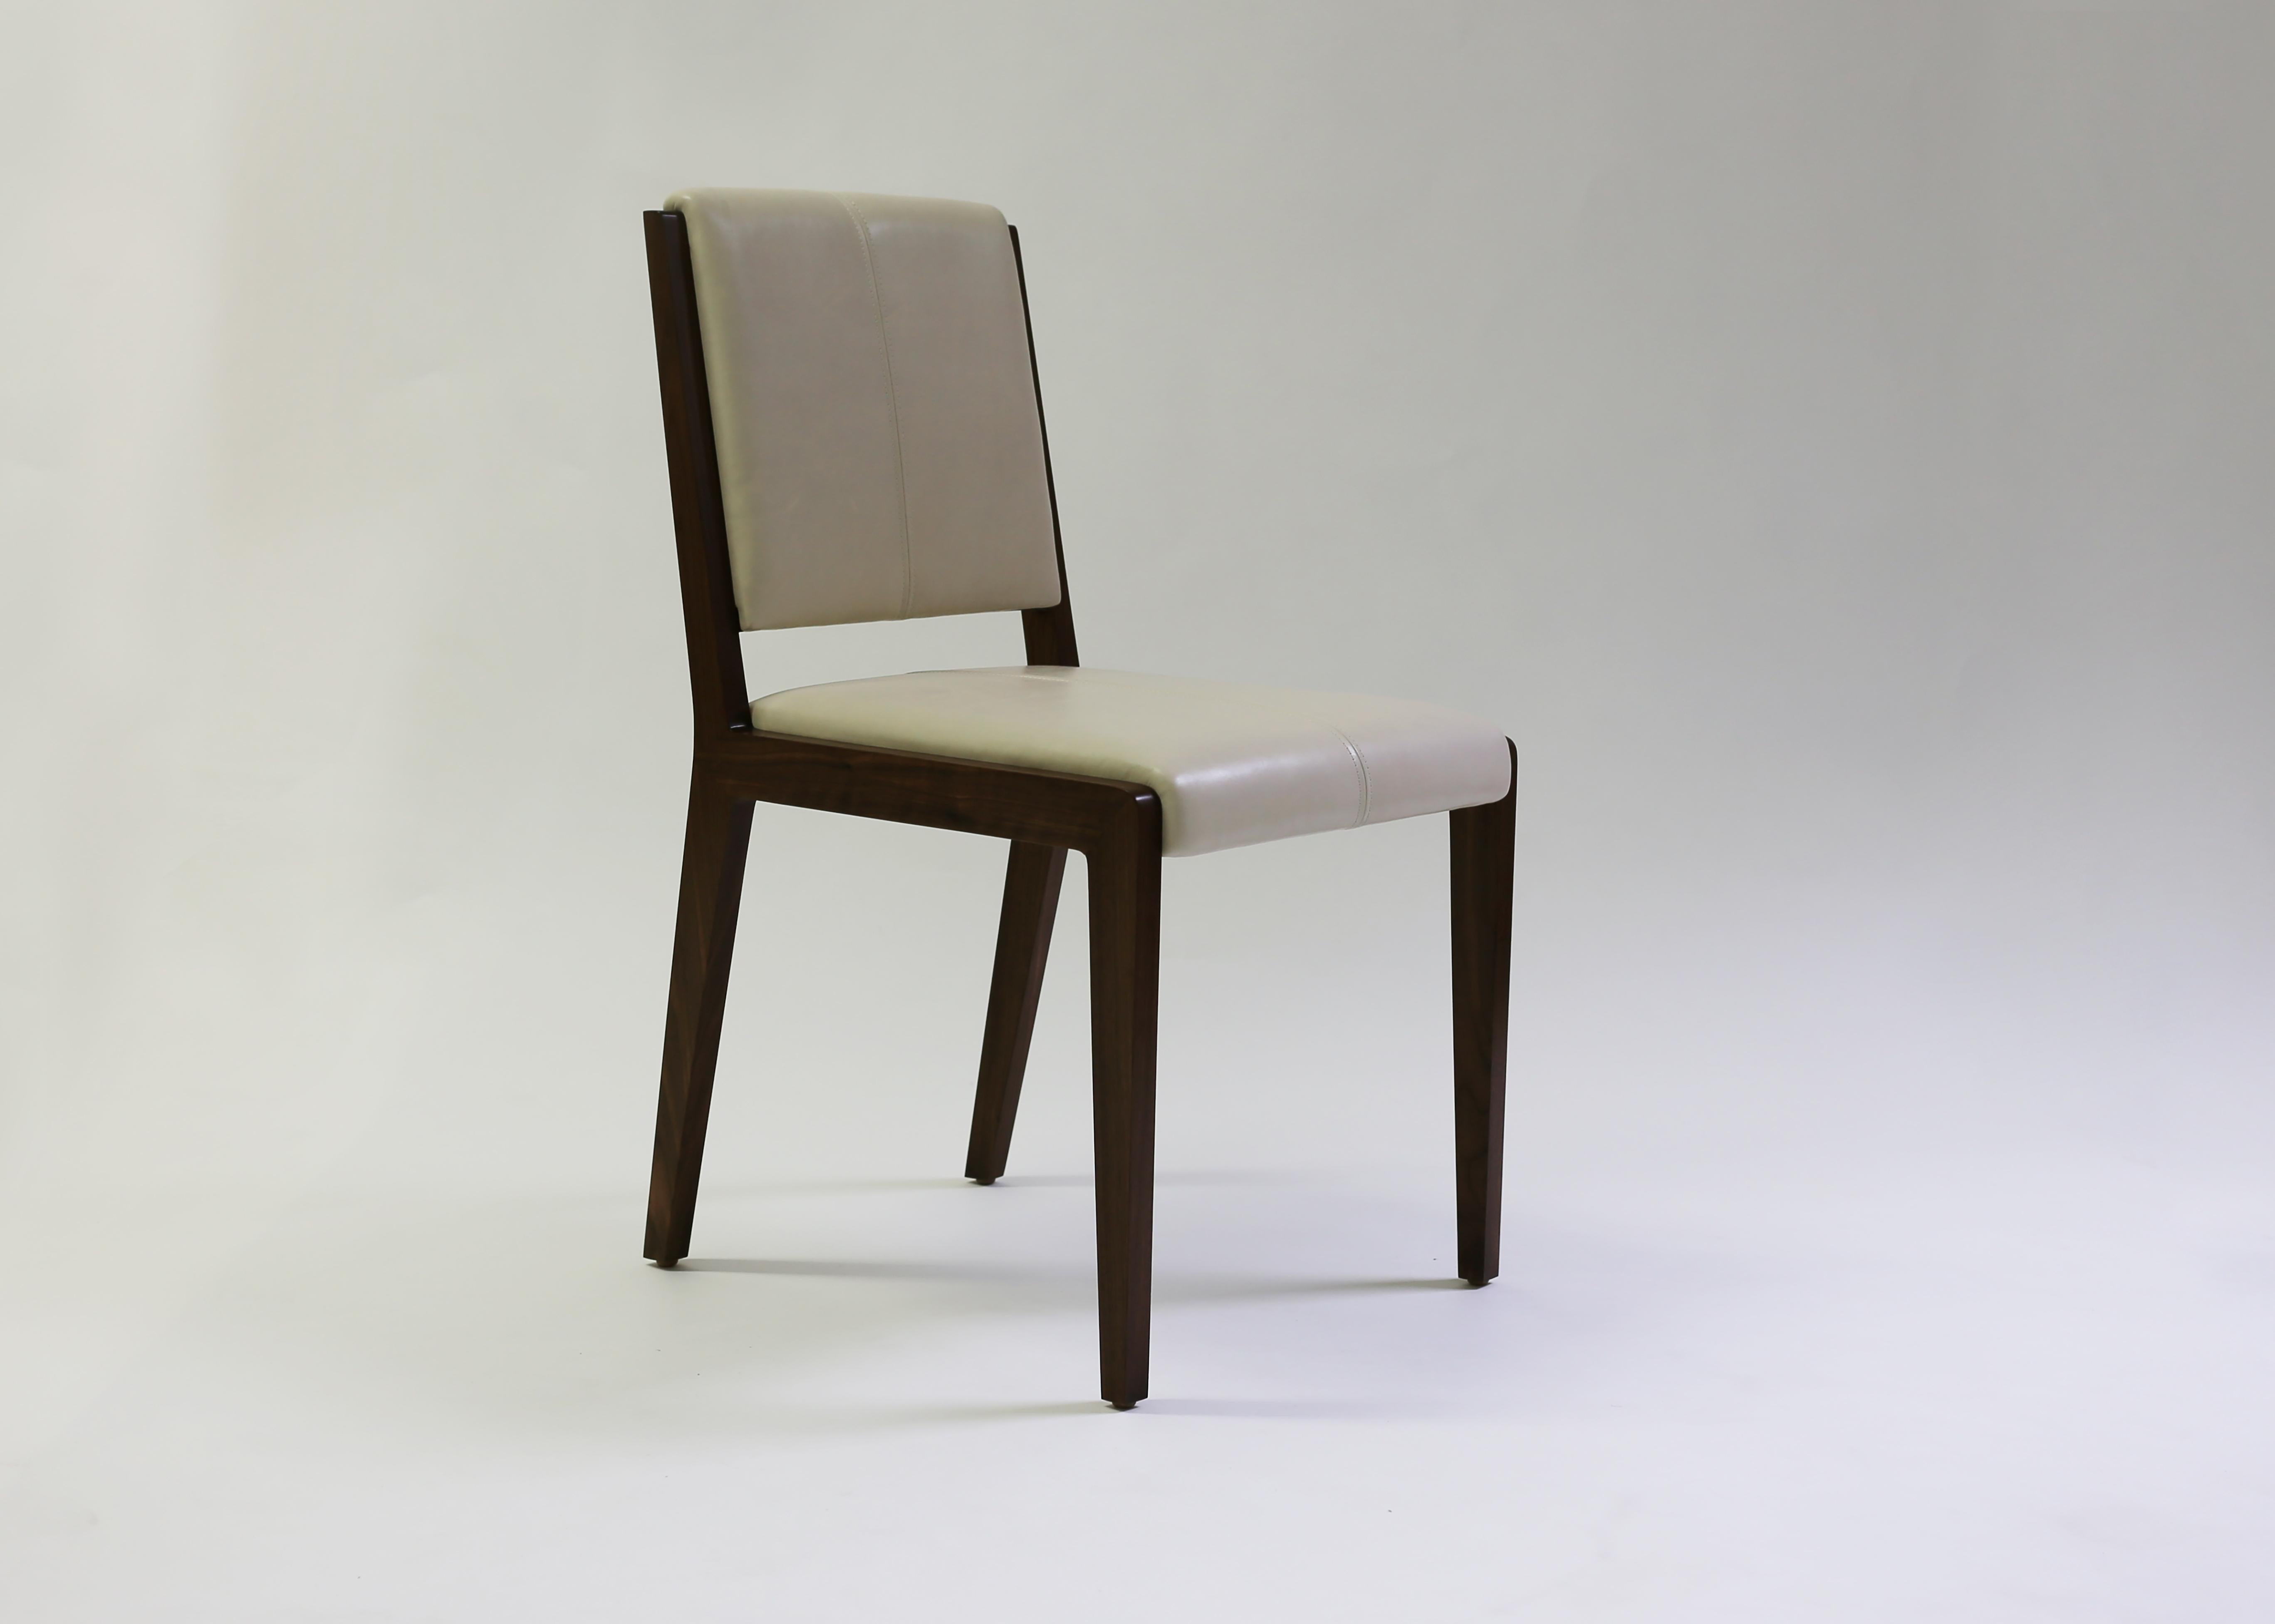 The Emile chair from LF upholstery shown in tan leather with handcrafted saddle stitch detail on the inside back and seat give a sophisticated look to a Classic style of chair. Can be used as both a dining chair and game chair, with hand carved wood